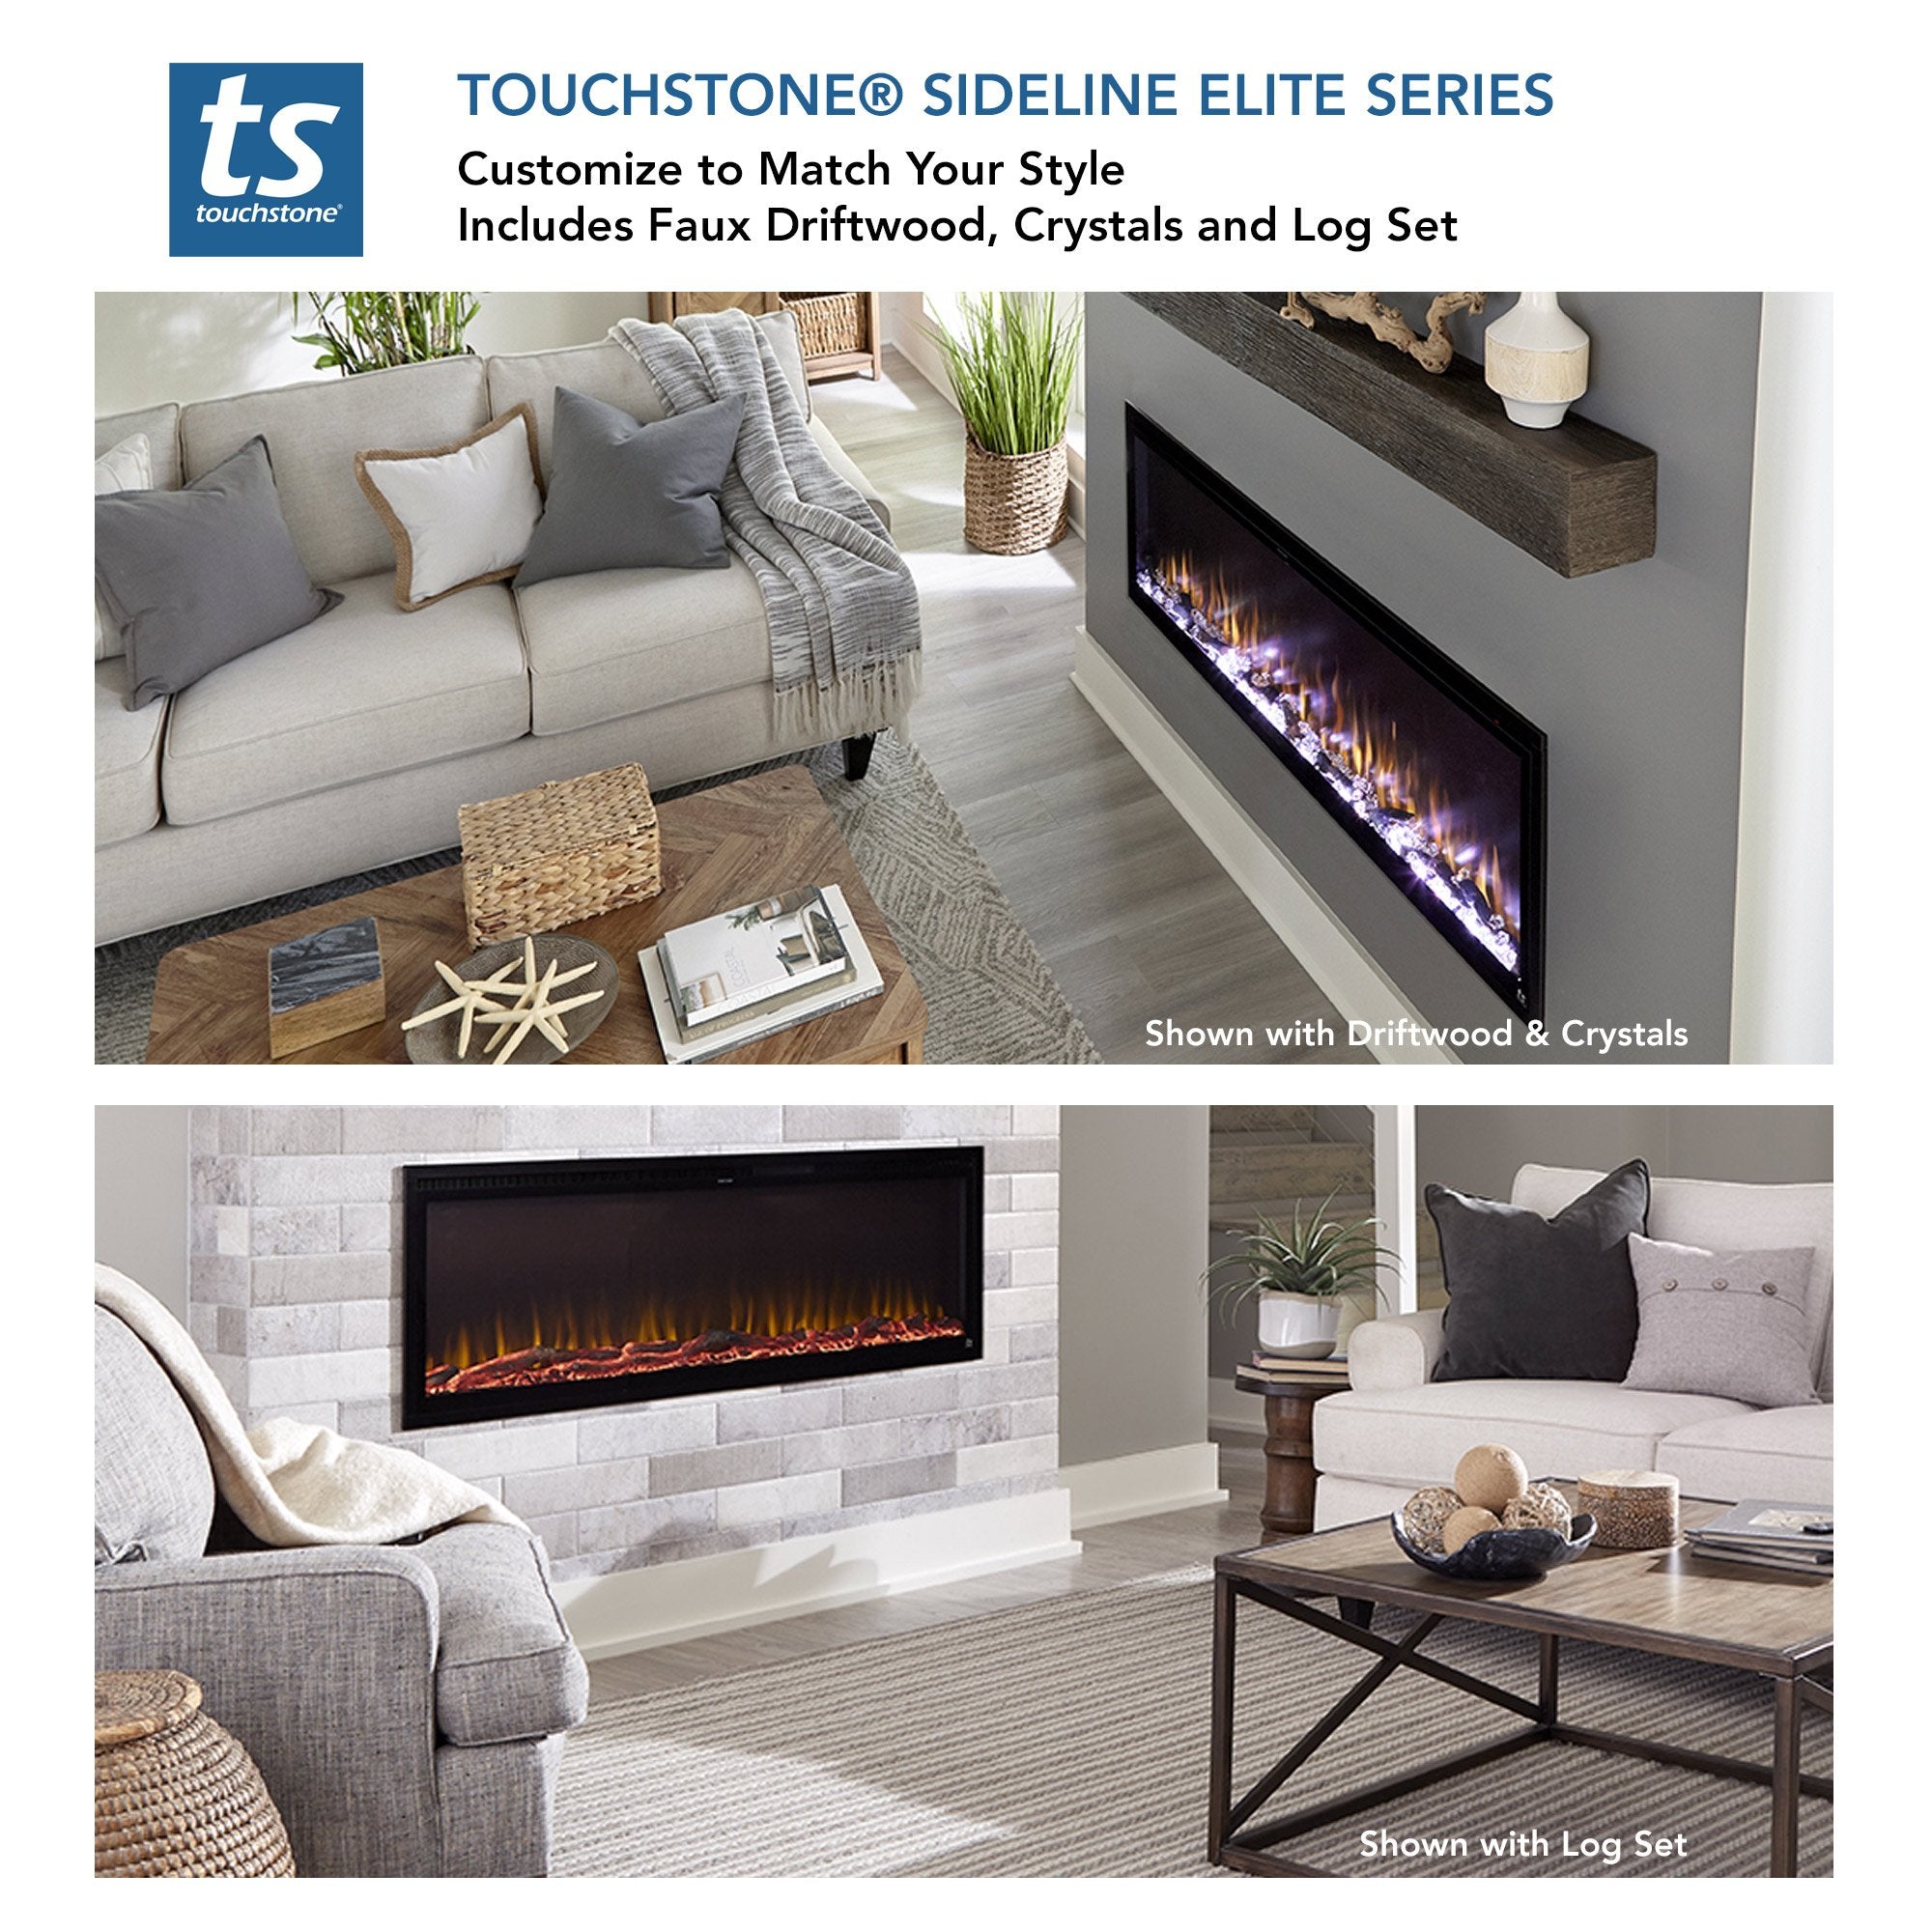 The Sideline Elite electric fireplace with crystals or logs